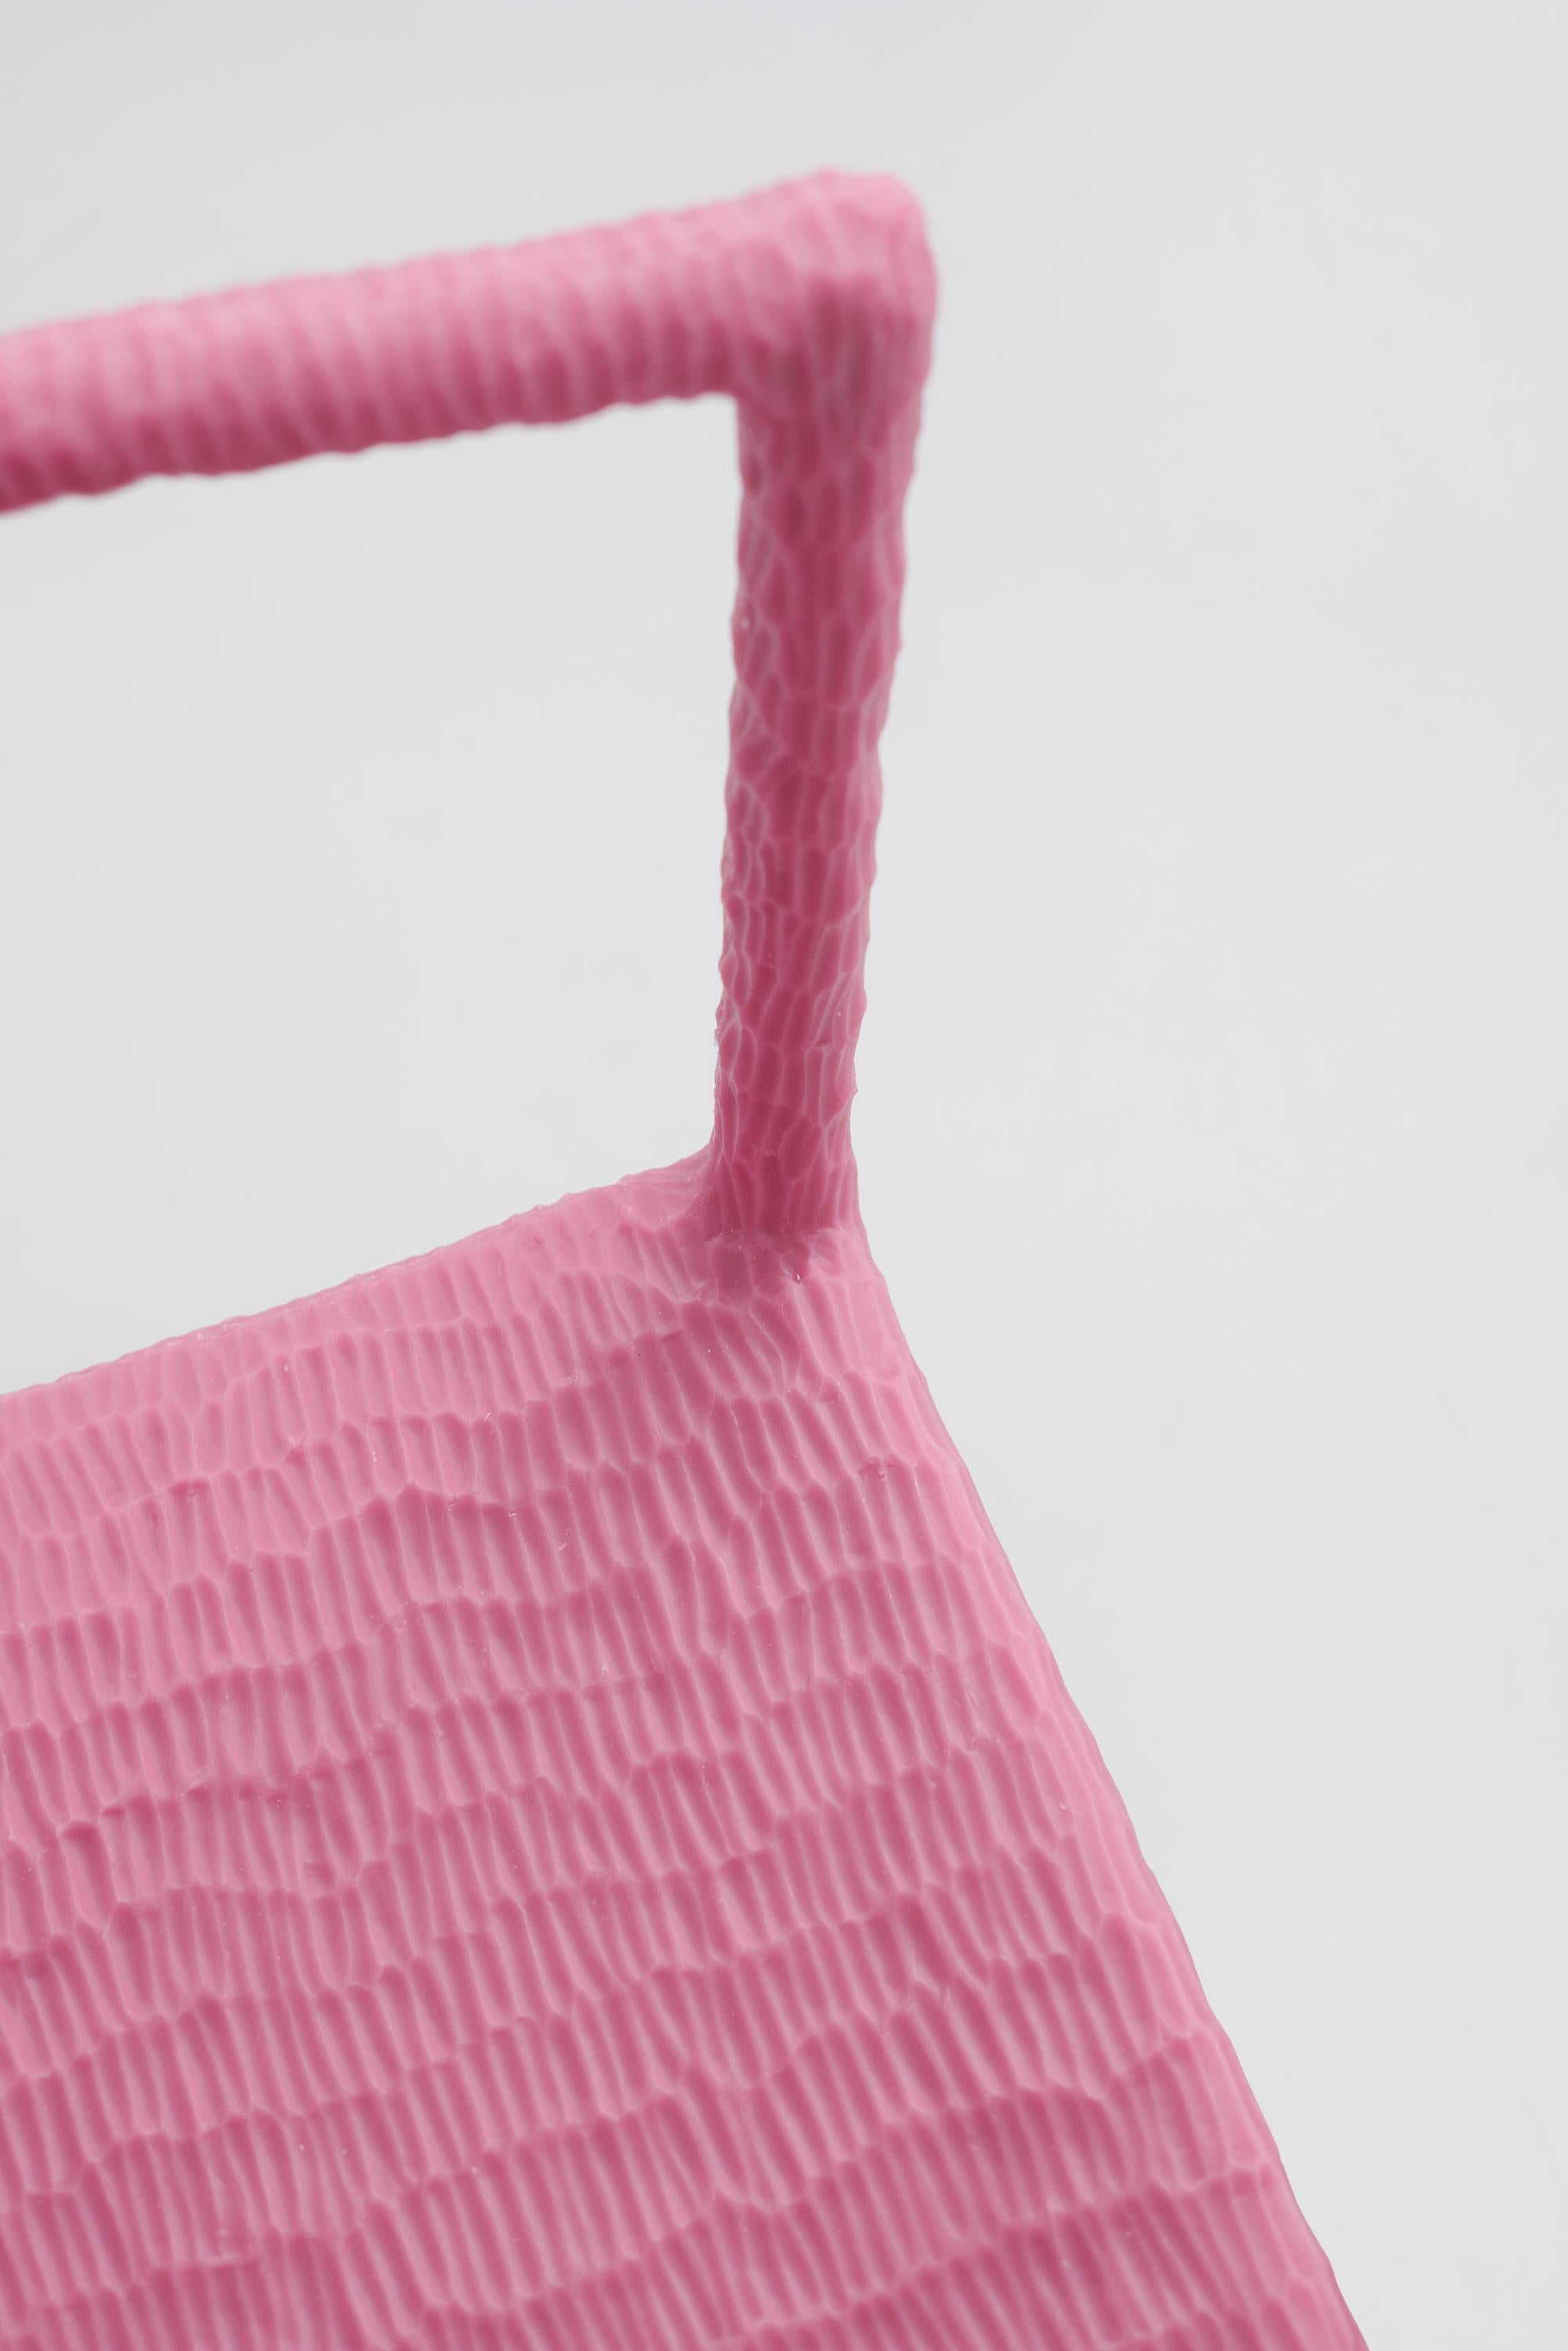 Post-Modern Contemporary Pink Chair, Minimum by Objects of Common Interest For Sale